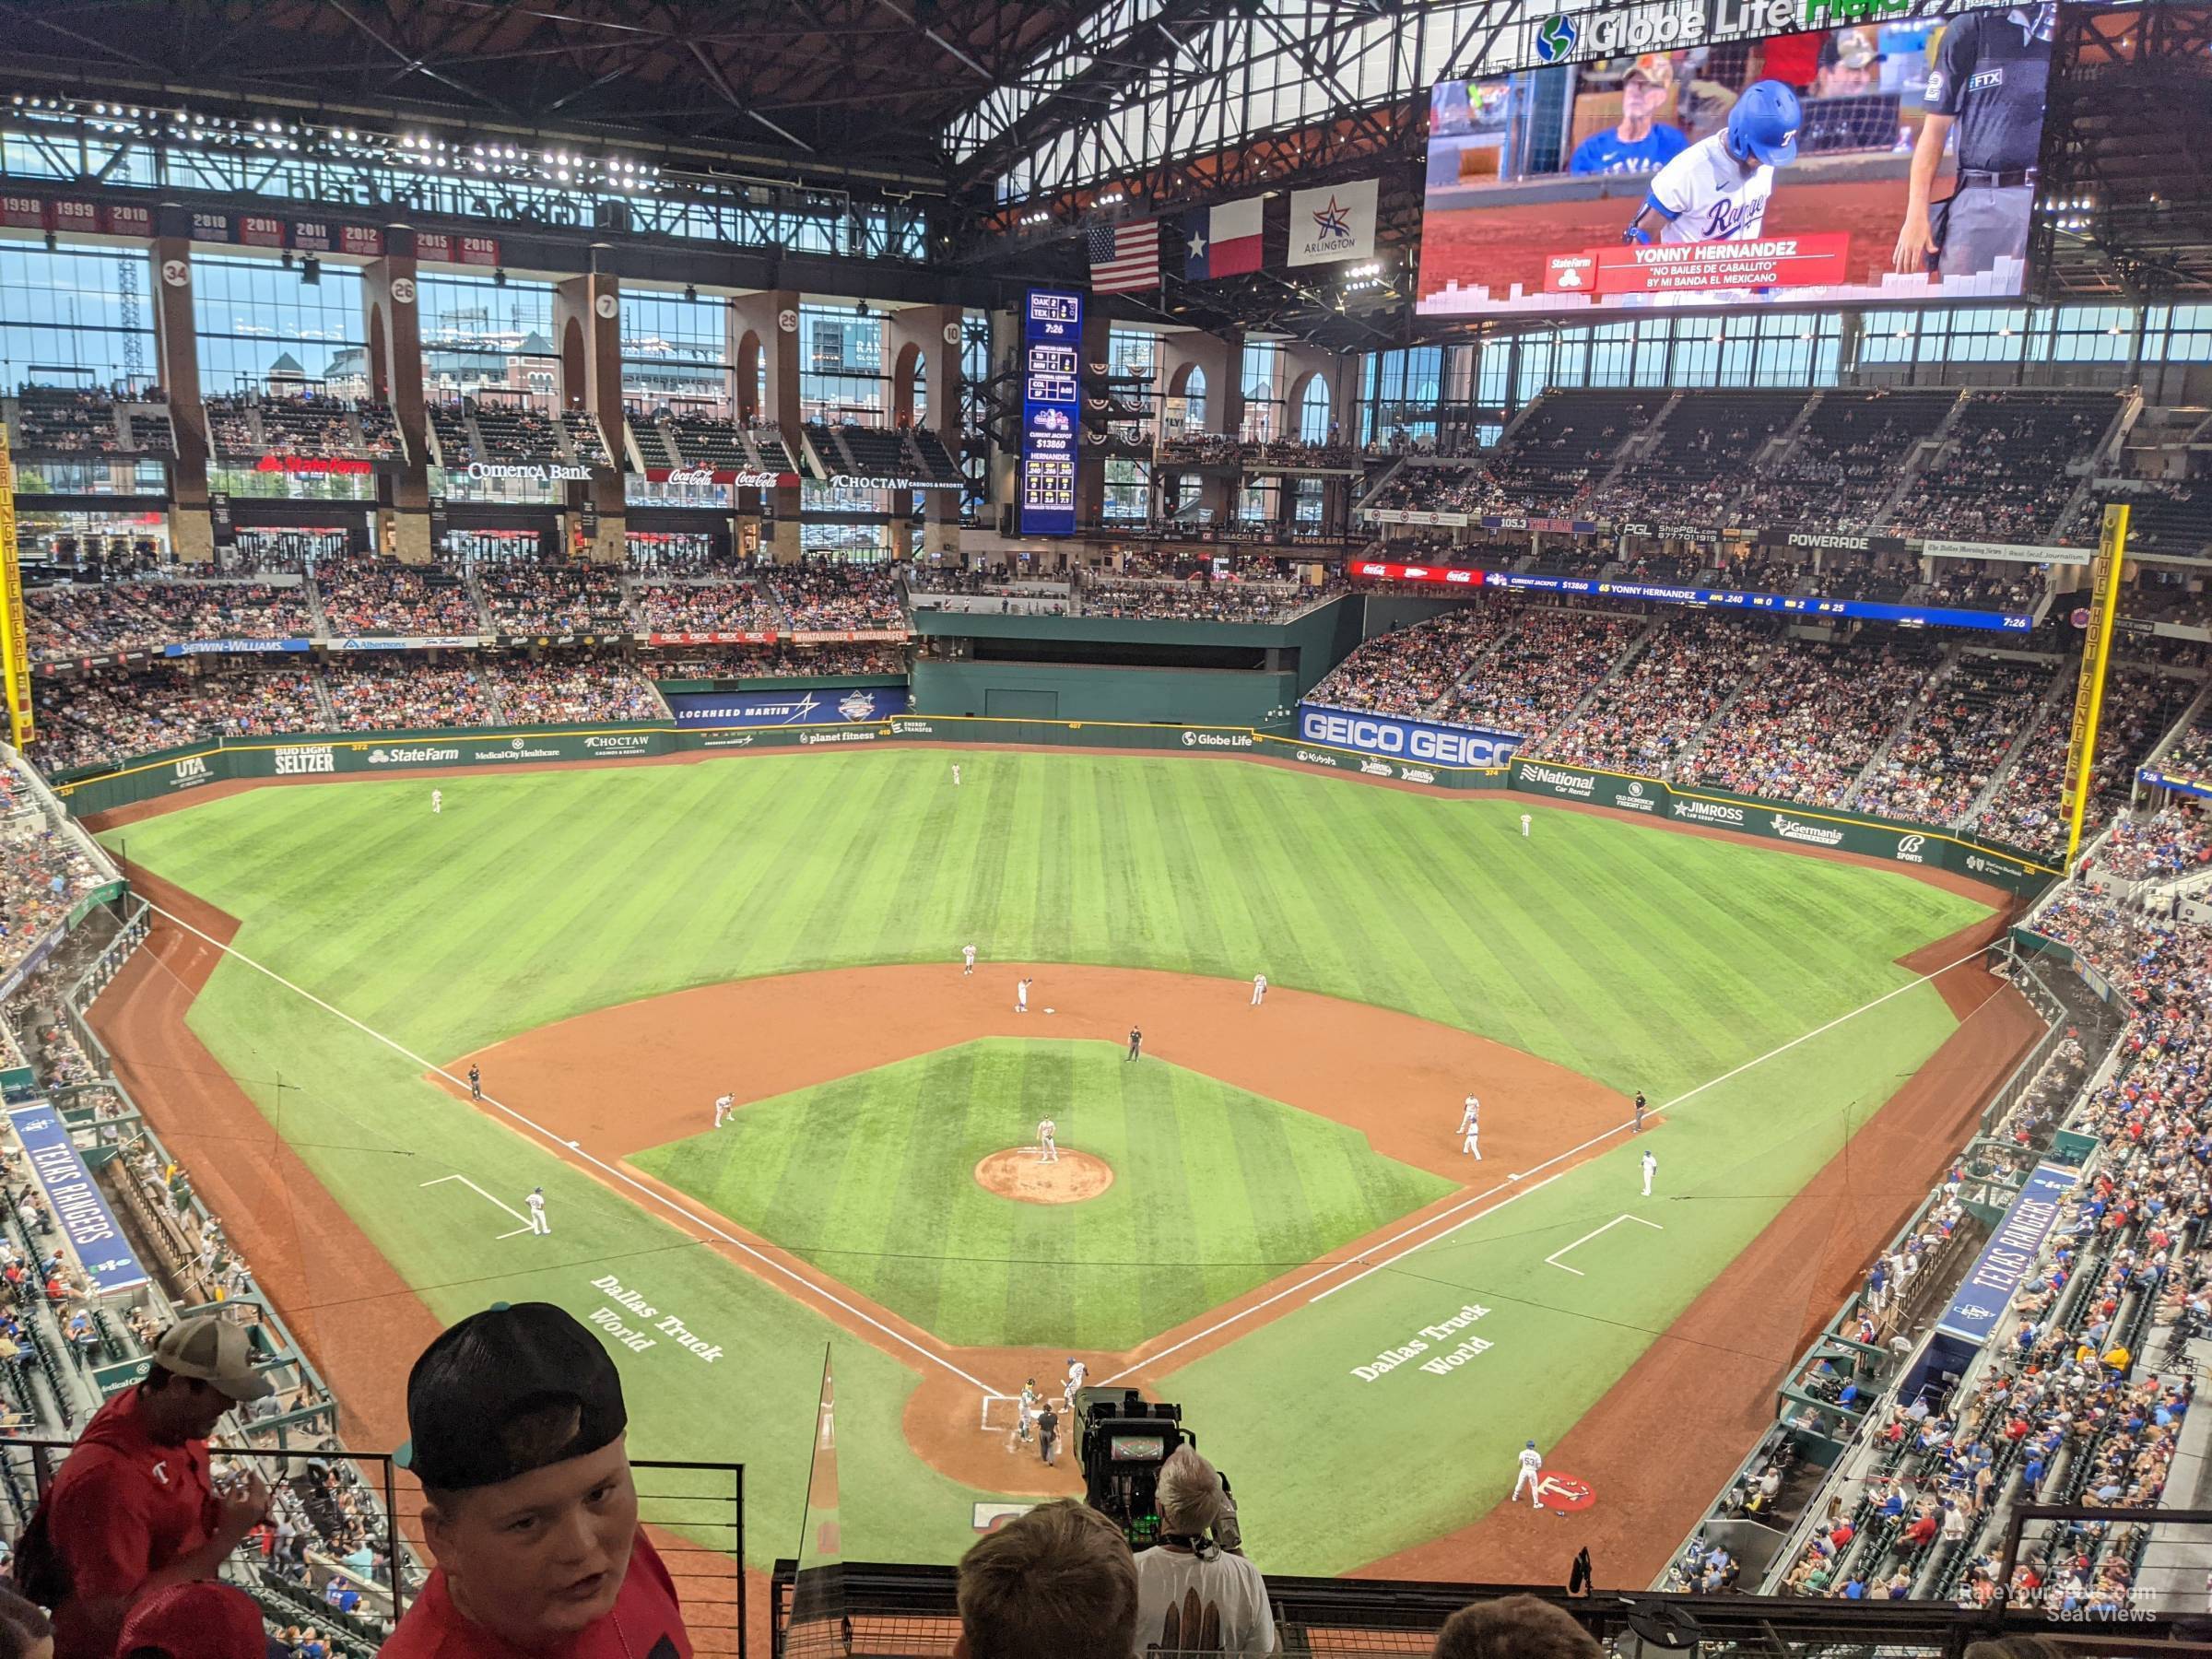 section 217, row 6_2 seat view  - globe life field